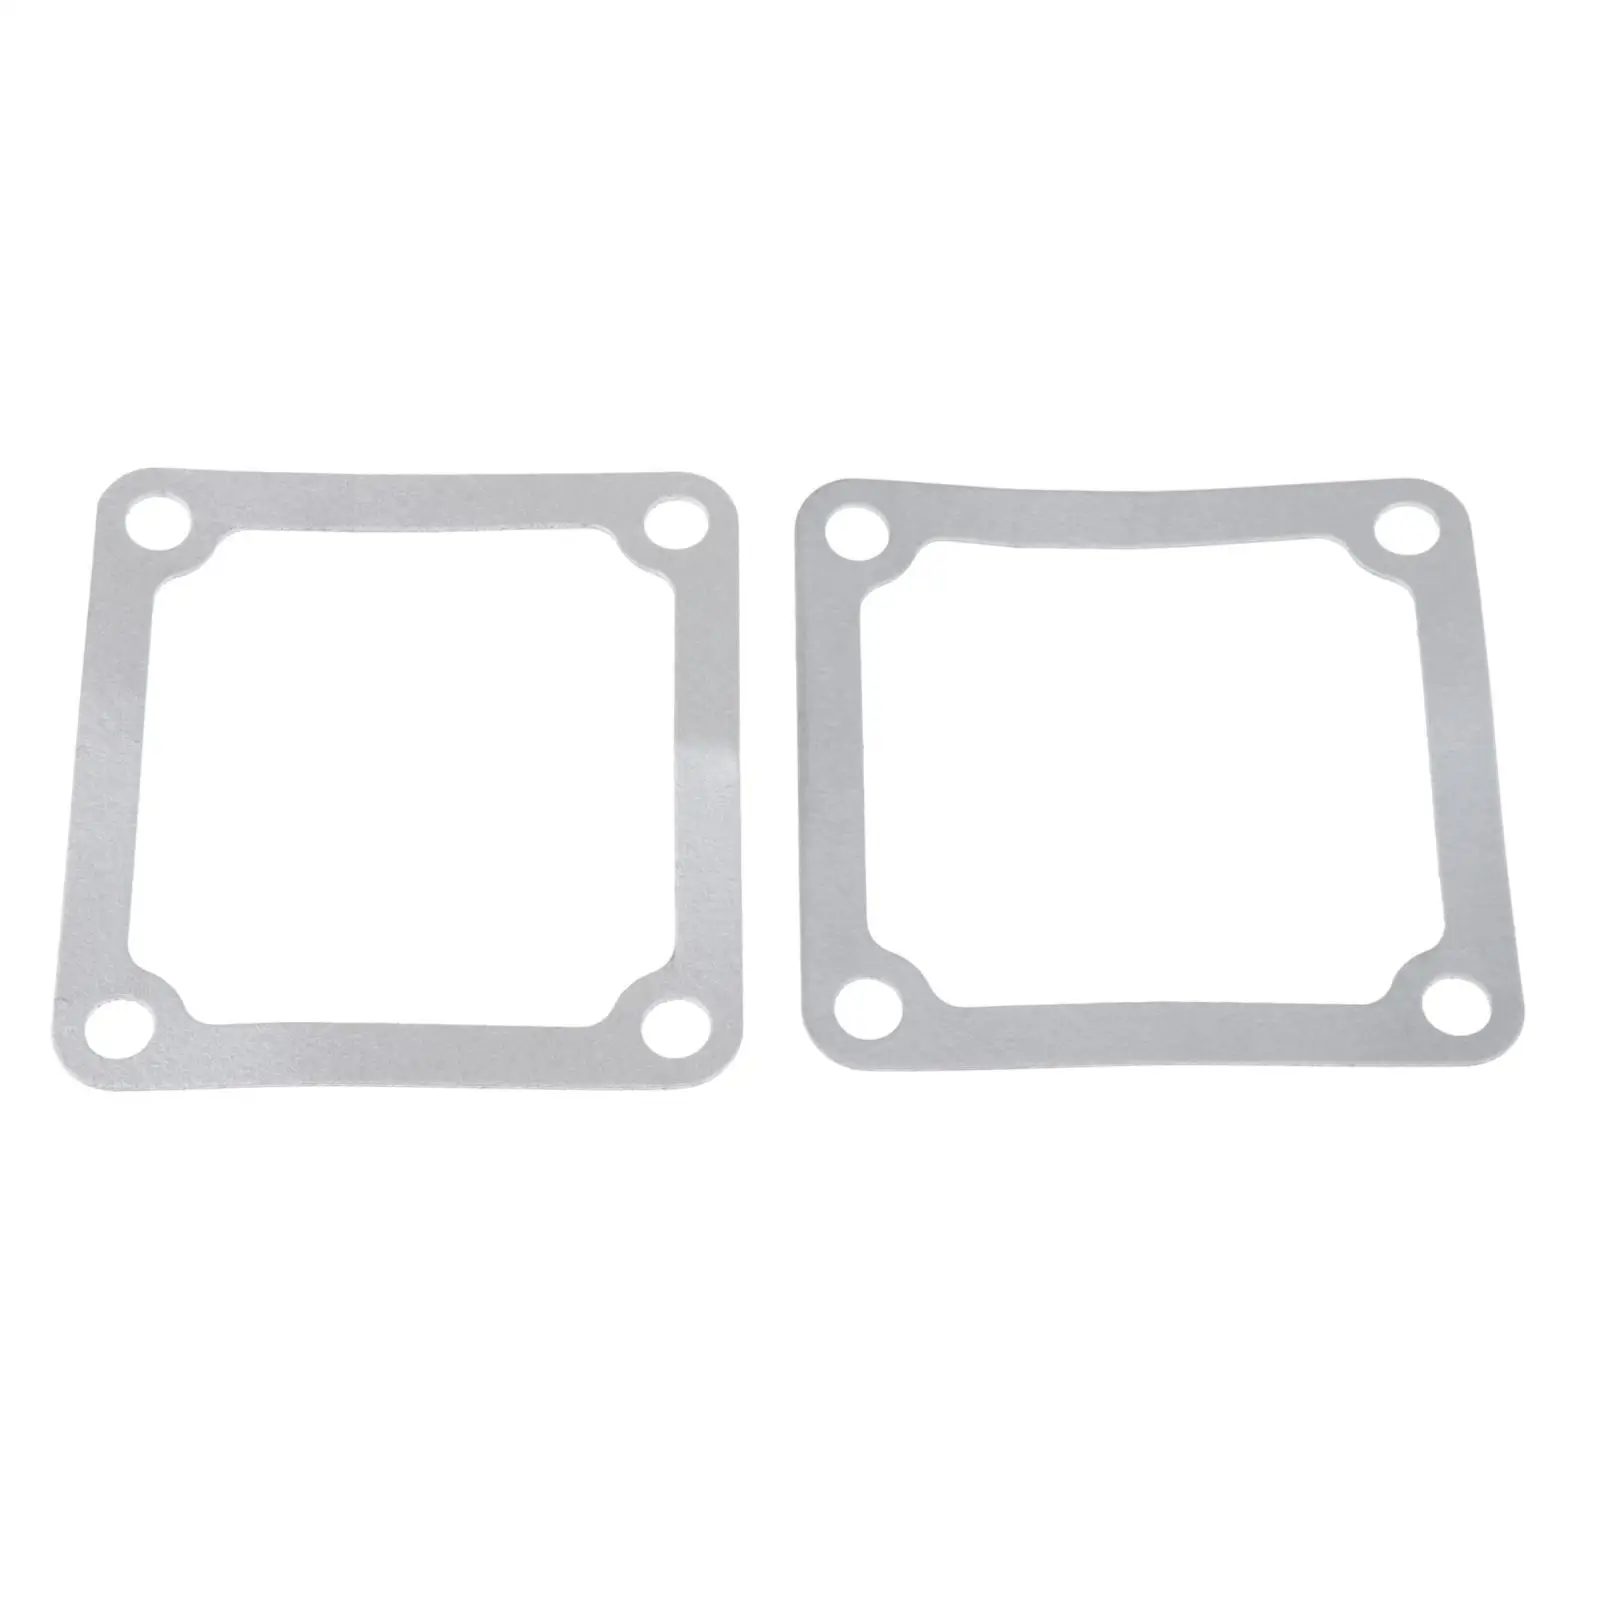 2x Intake Heater Grid Gaskets Easy to Install Auto Leakproof Direct Replaces 93x98mm Portable for Auto Parts Paper